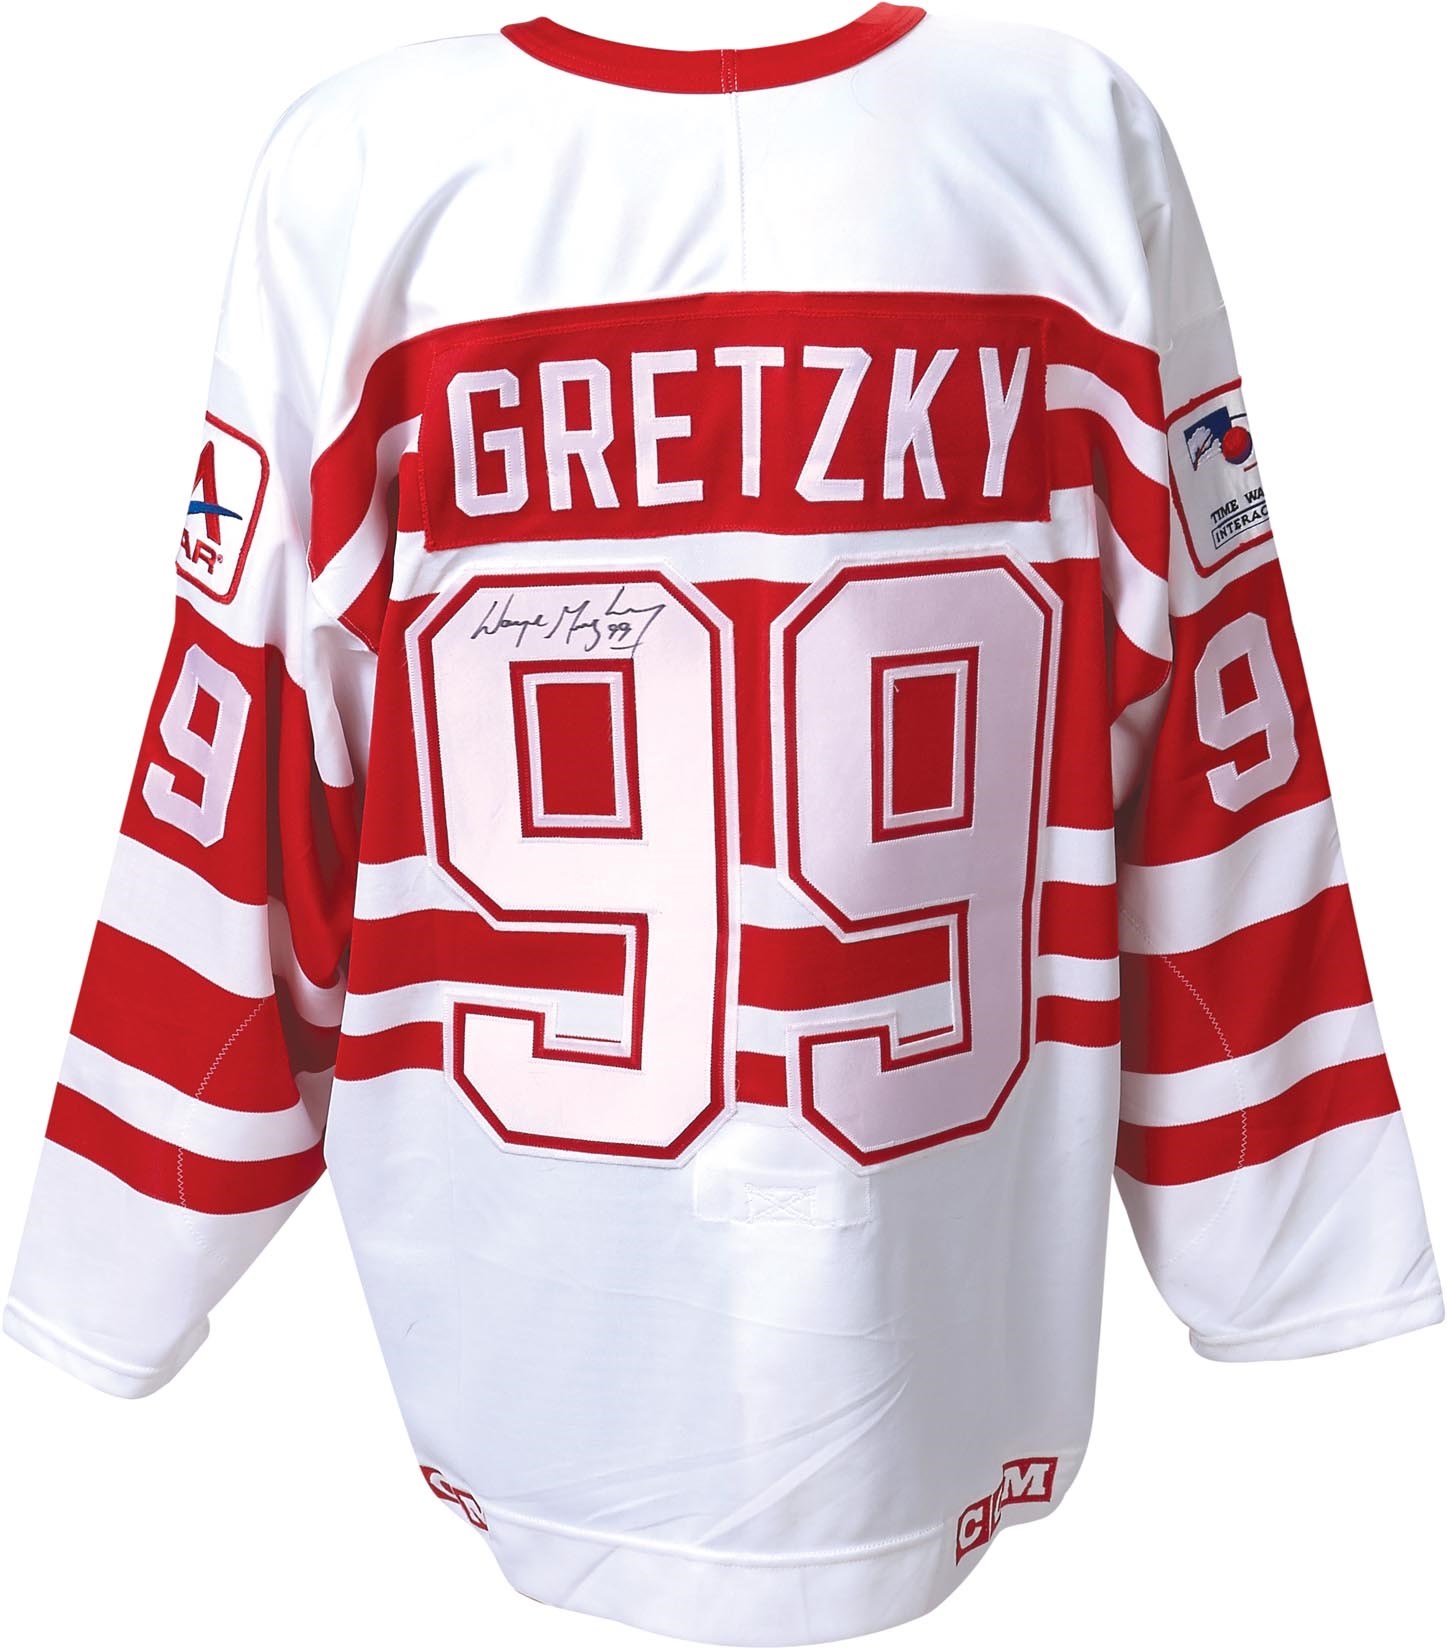 Wayne Gretzky's last NHL game-worn jersey sells for record